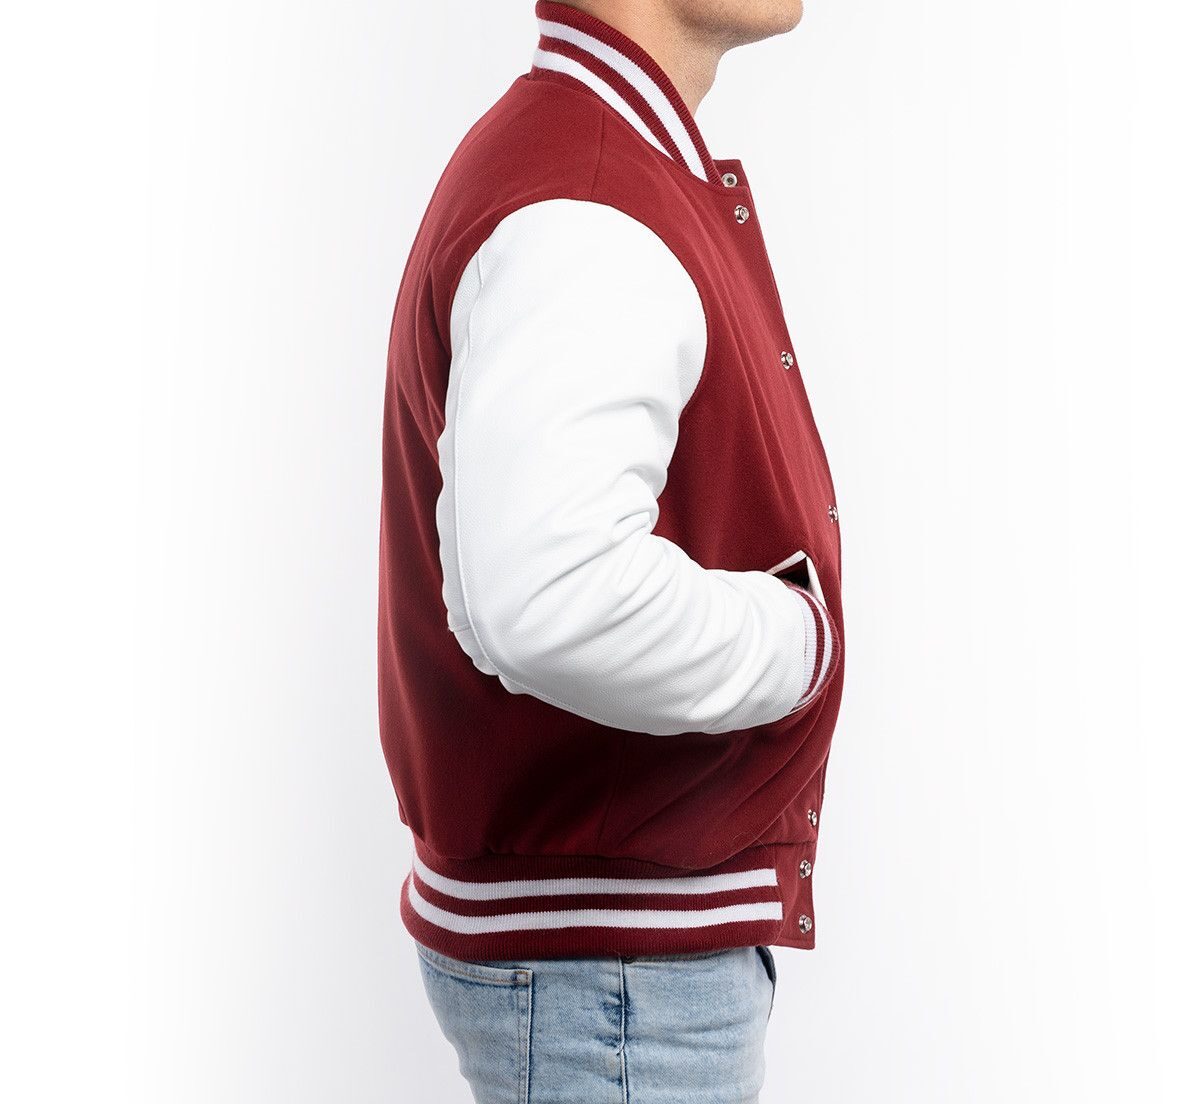 Varsity Jacket with Red Wool Body & Bright White Leather Sleeves ...